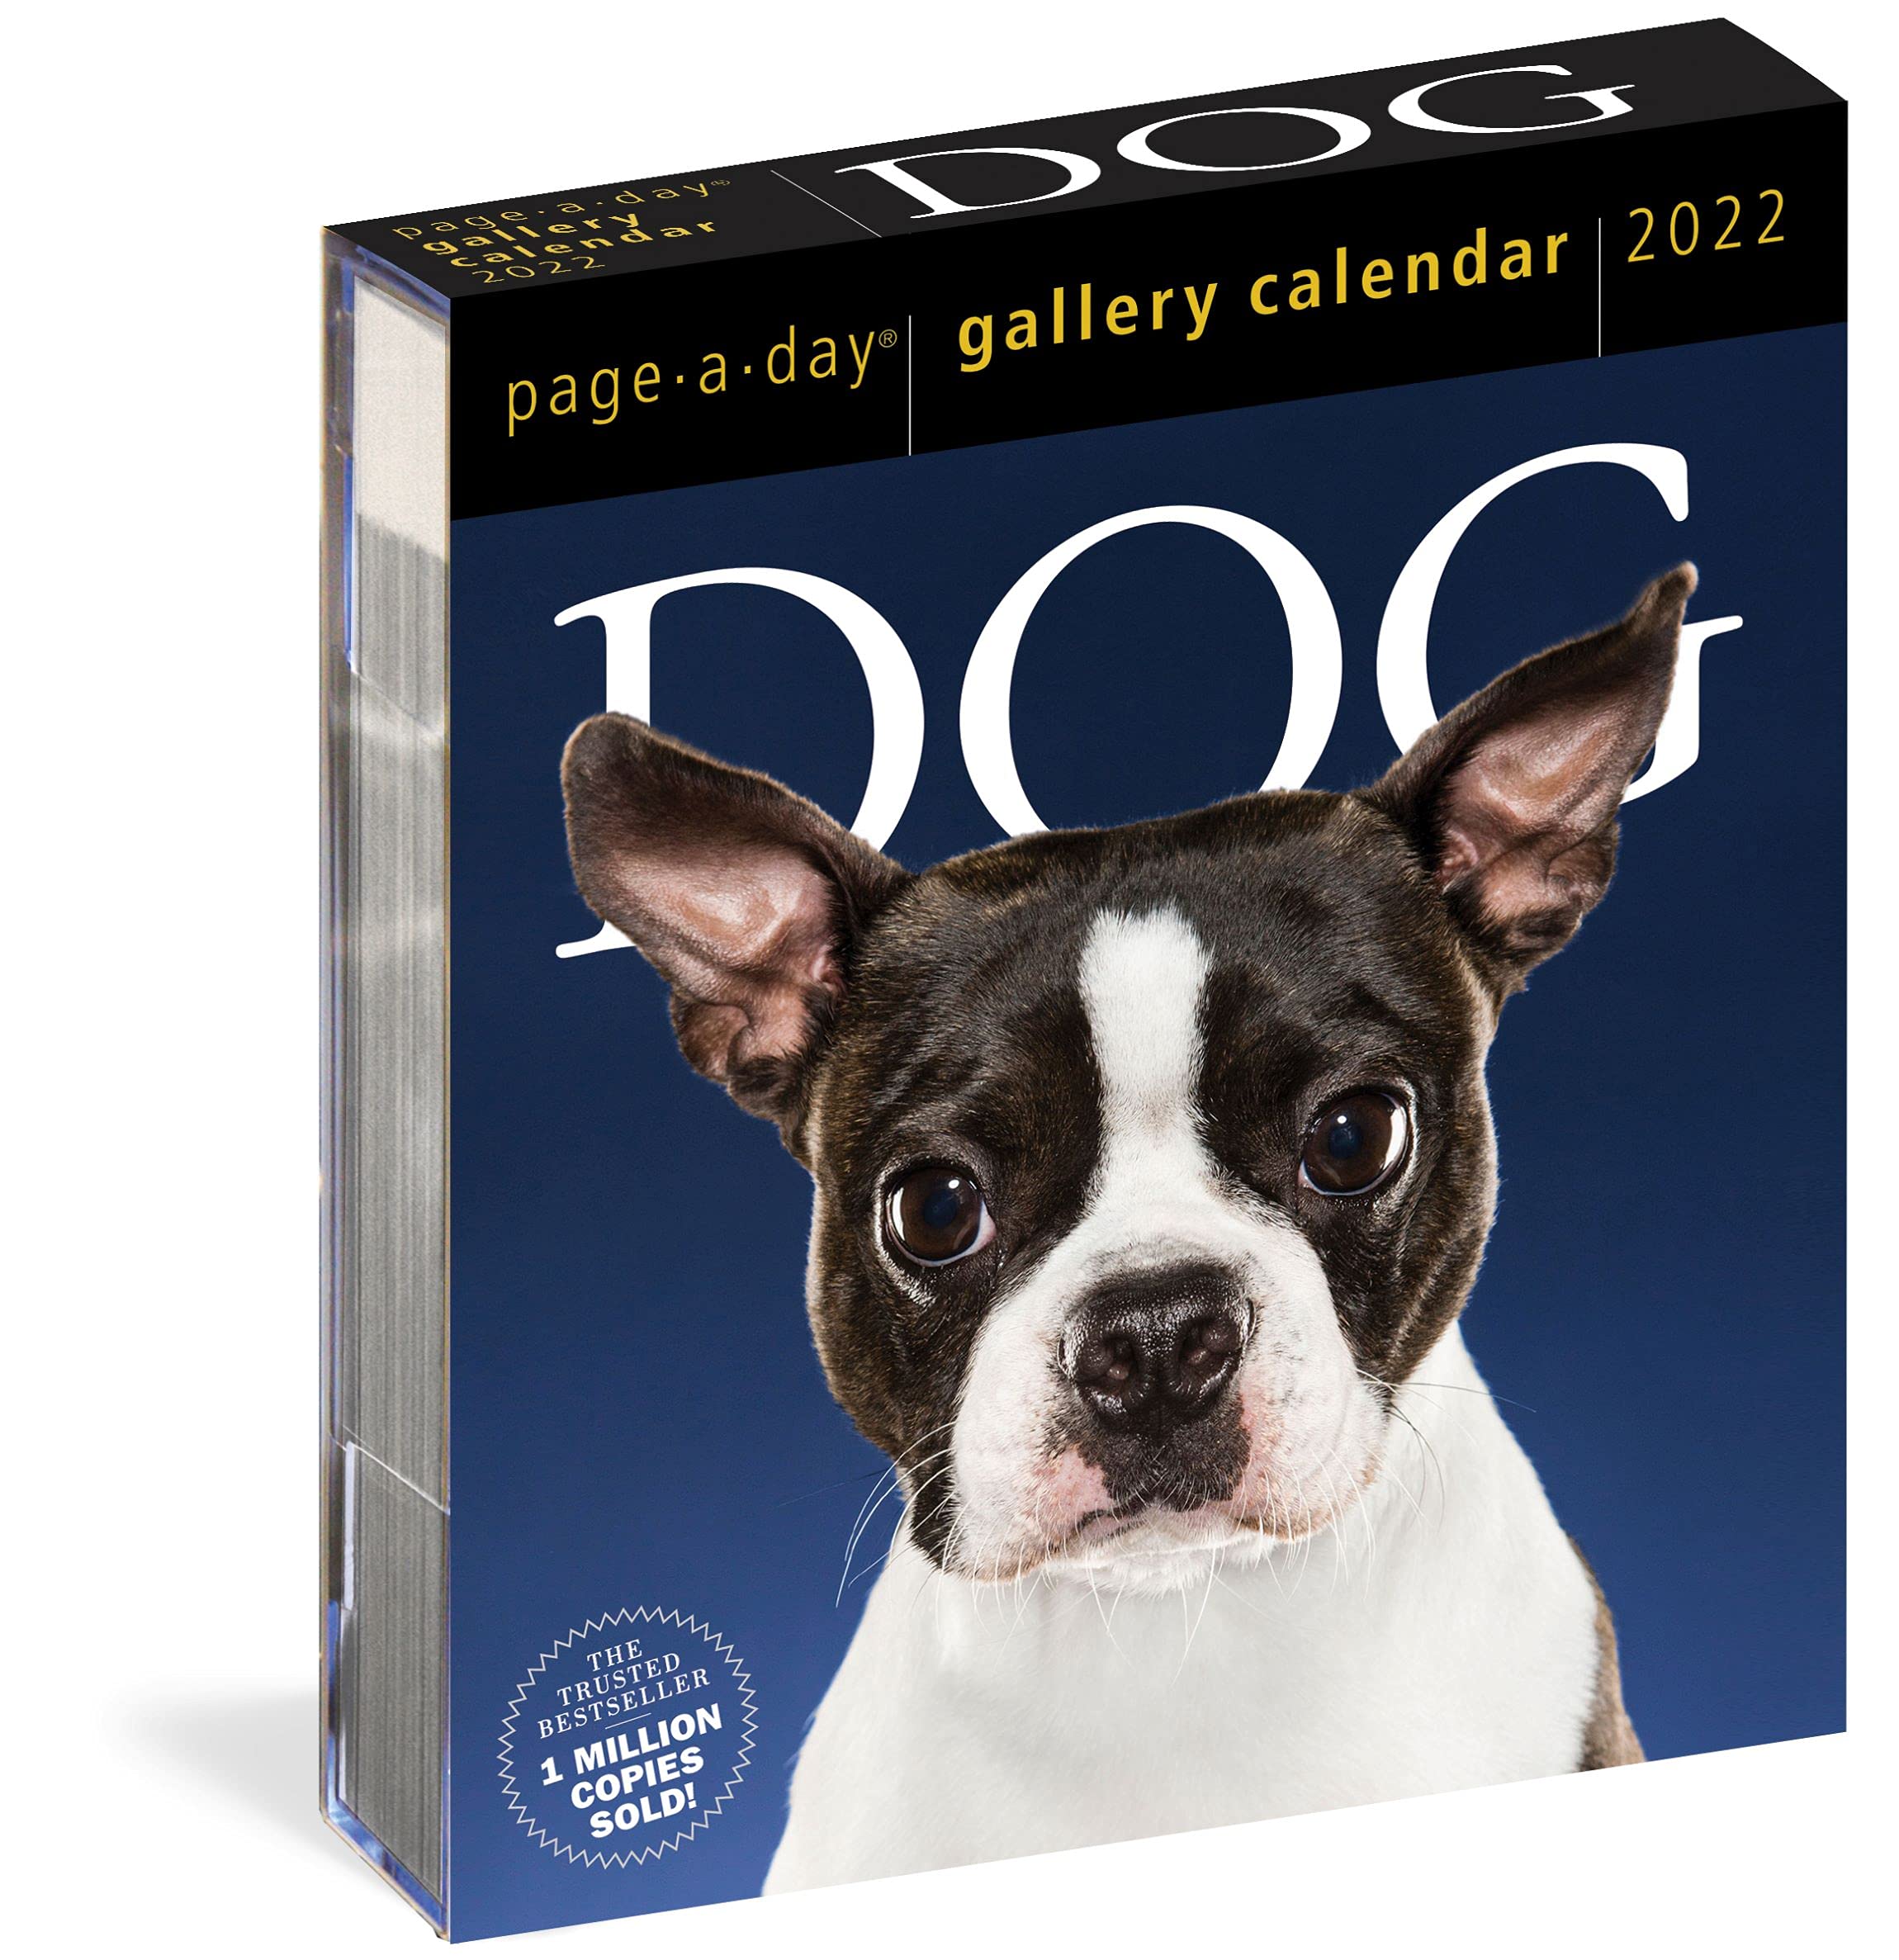 Dog-Page-A-Day-Gallery-Calendar-2022-Stunning-Portraits-That-Speak-to.jpg